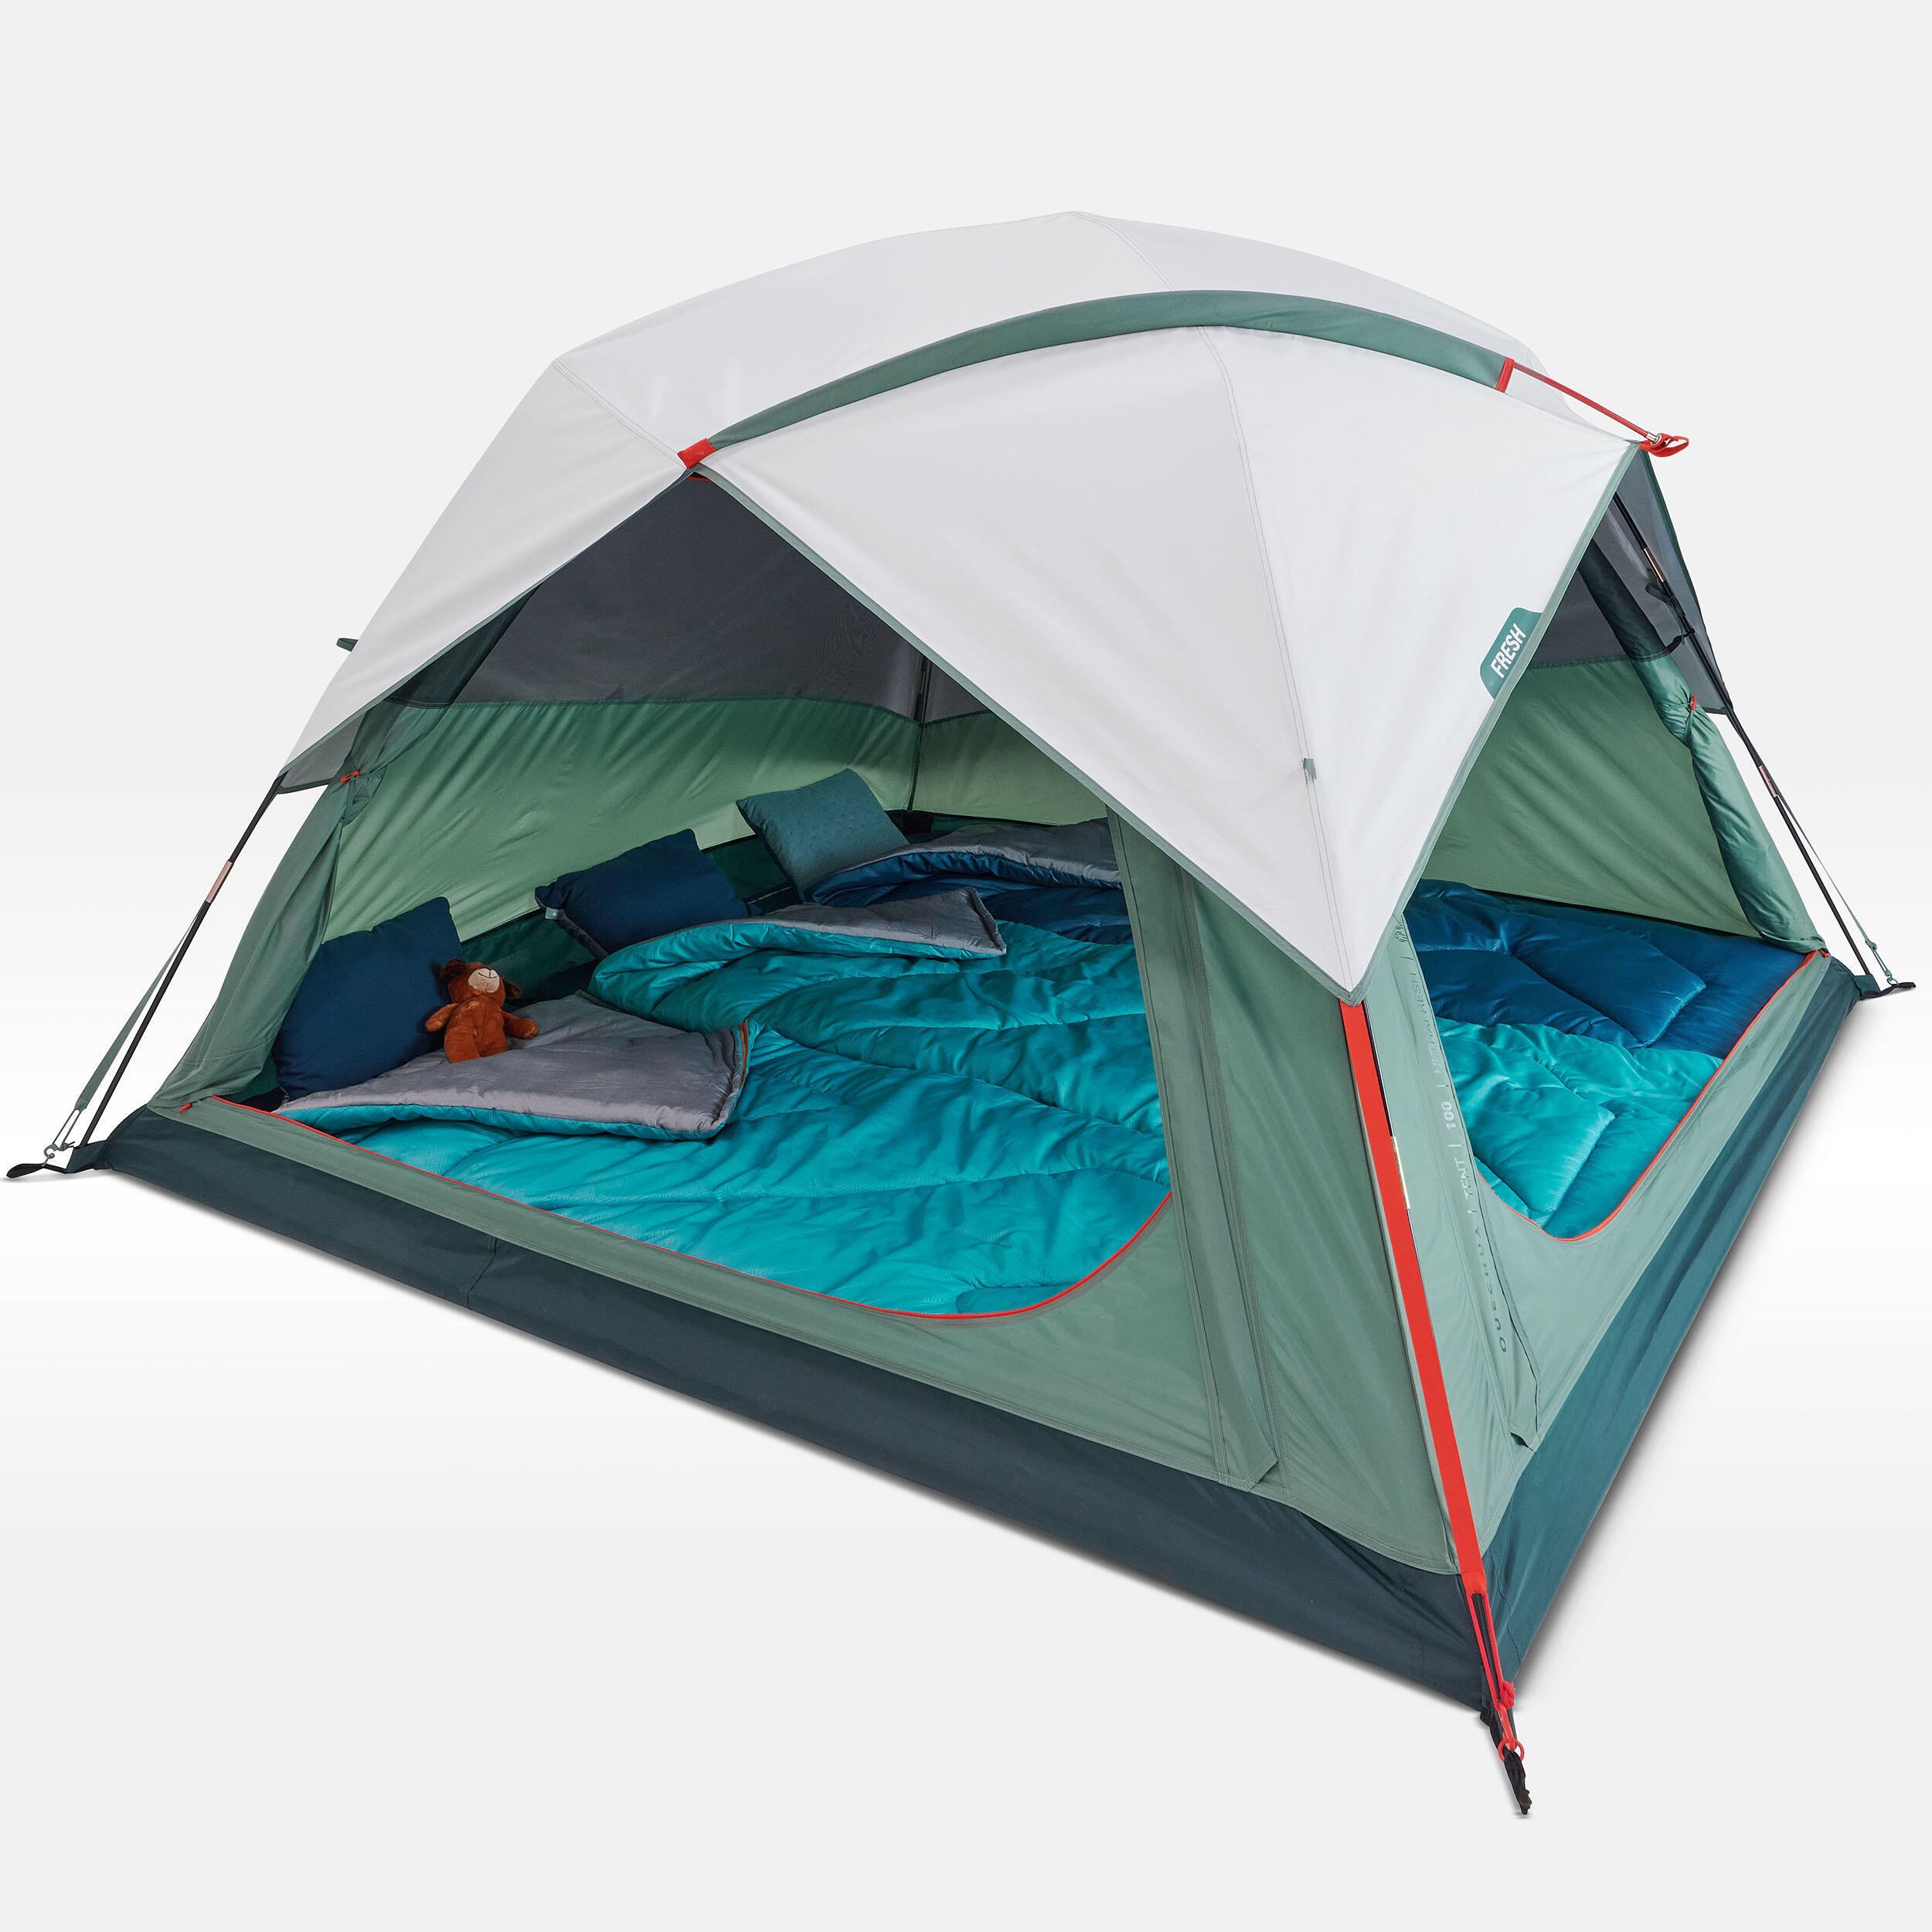 Camping tent - MH100  - 3-person - Fresh 9/24